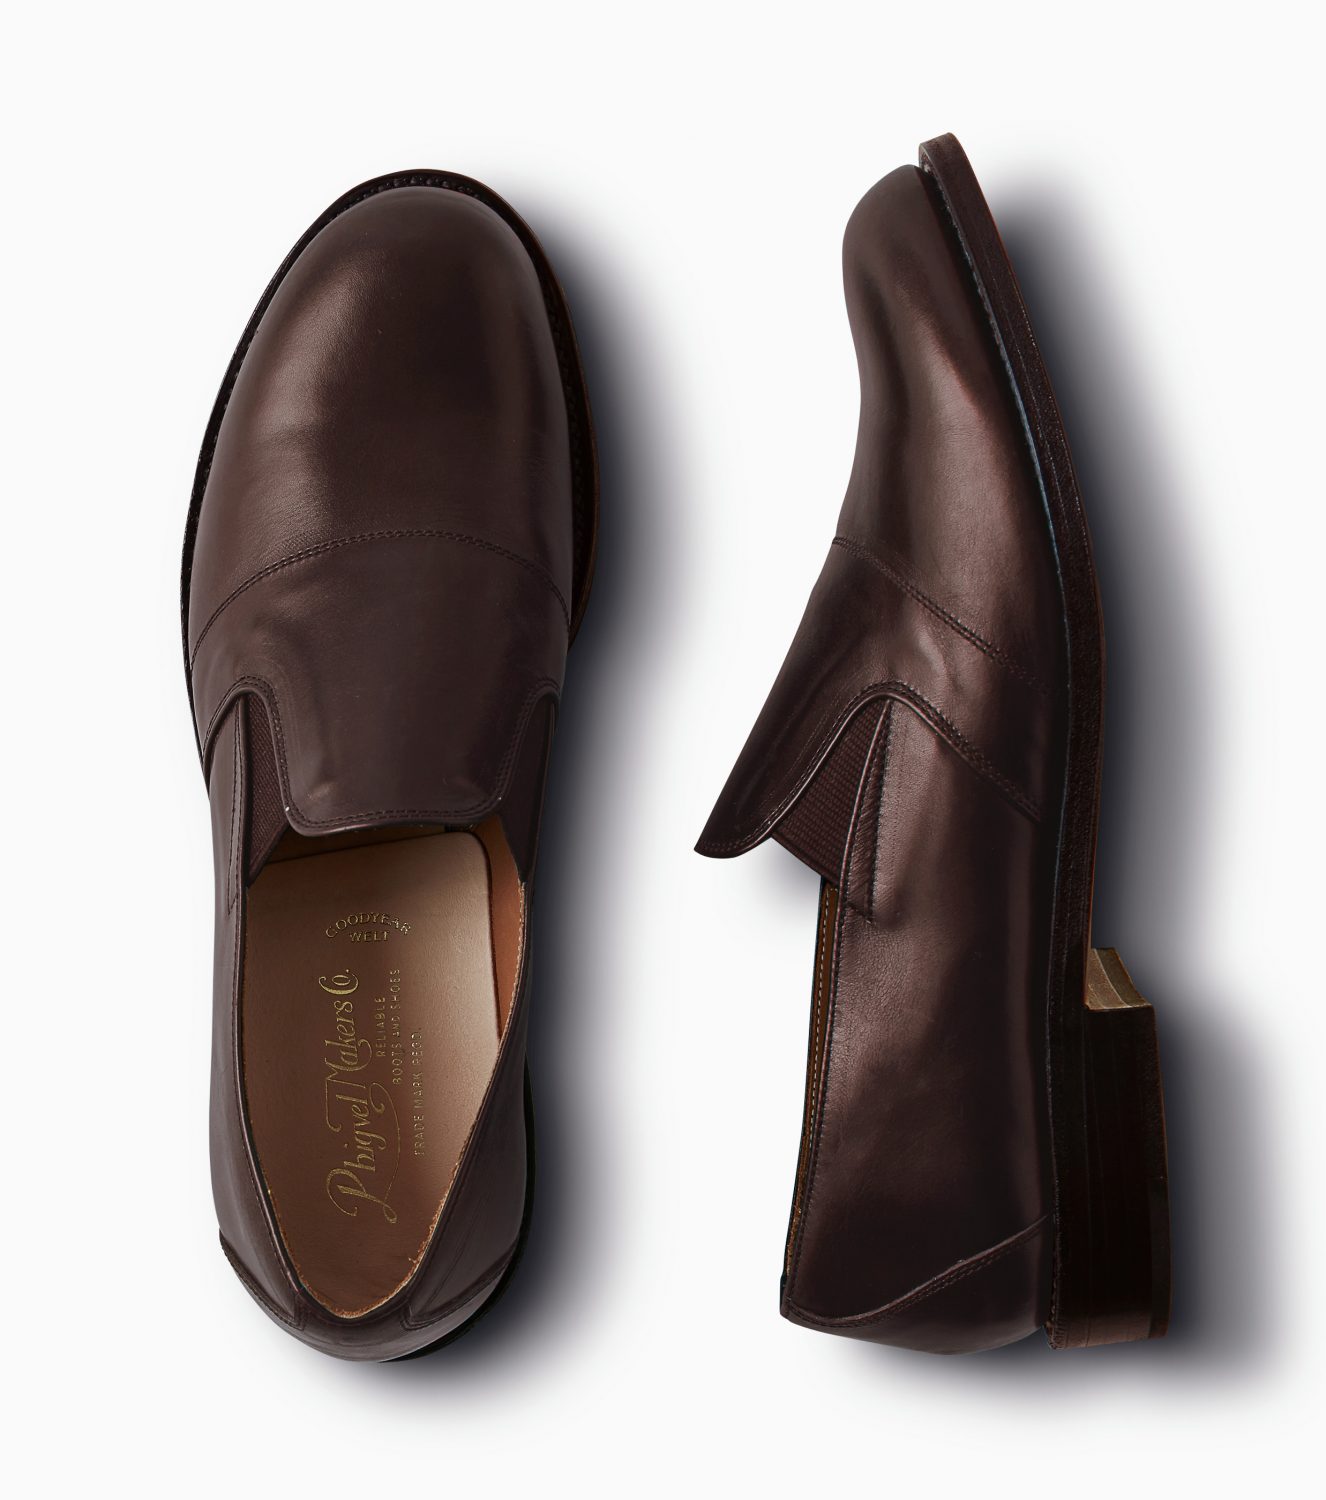 Limited Product “Leather Slip-on Shoes”